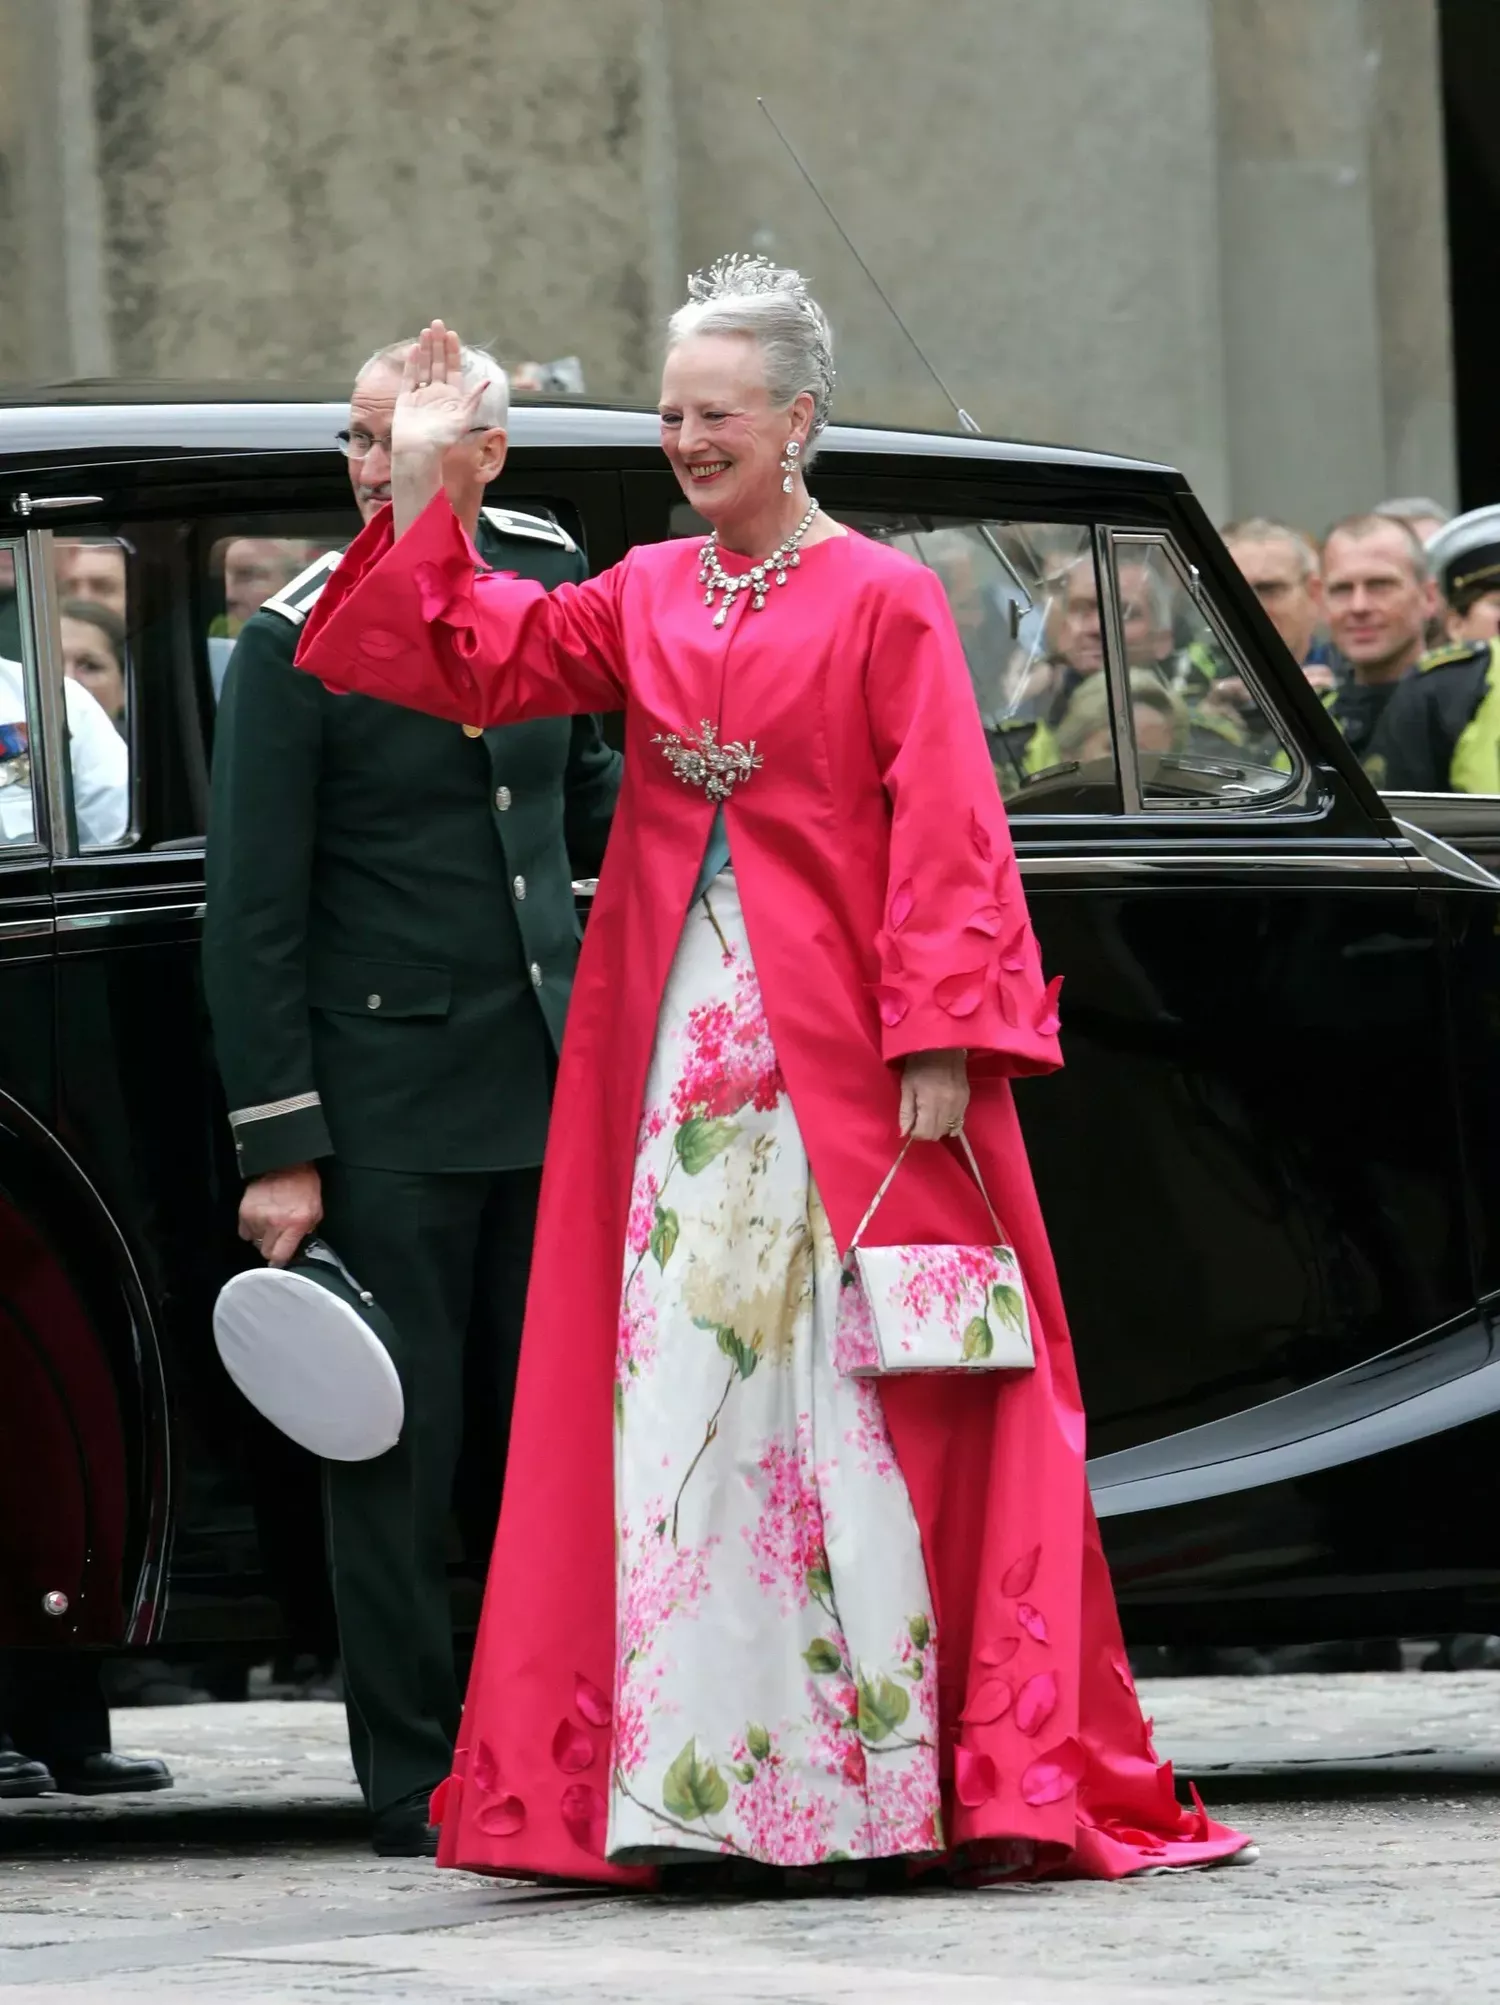 At the wedding of her son, Crown Prince Frederik and Mary Donaldson, Copenhagen Cathedral, 14 May 2004